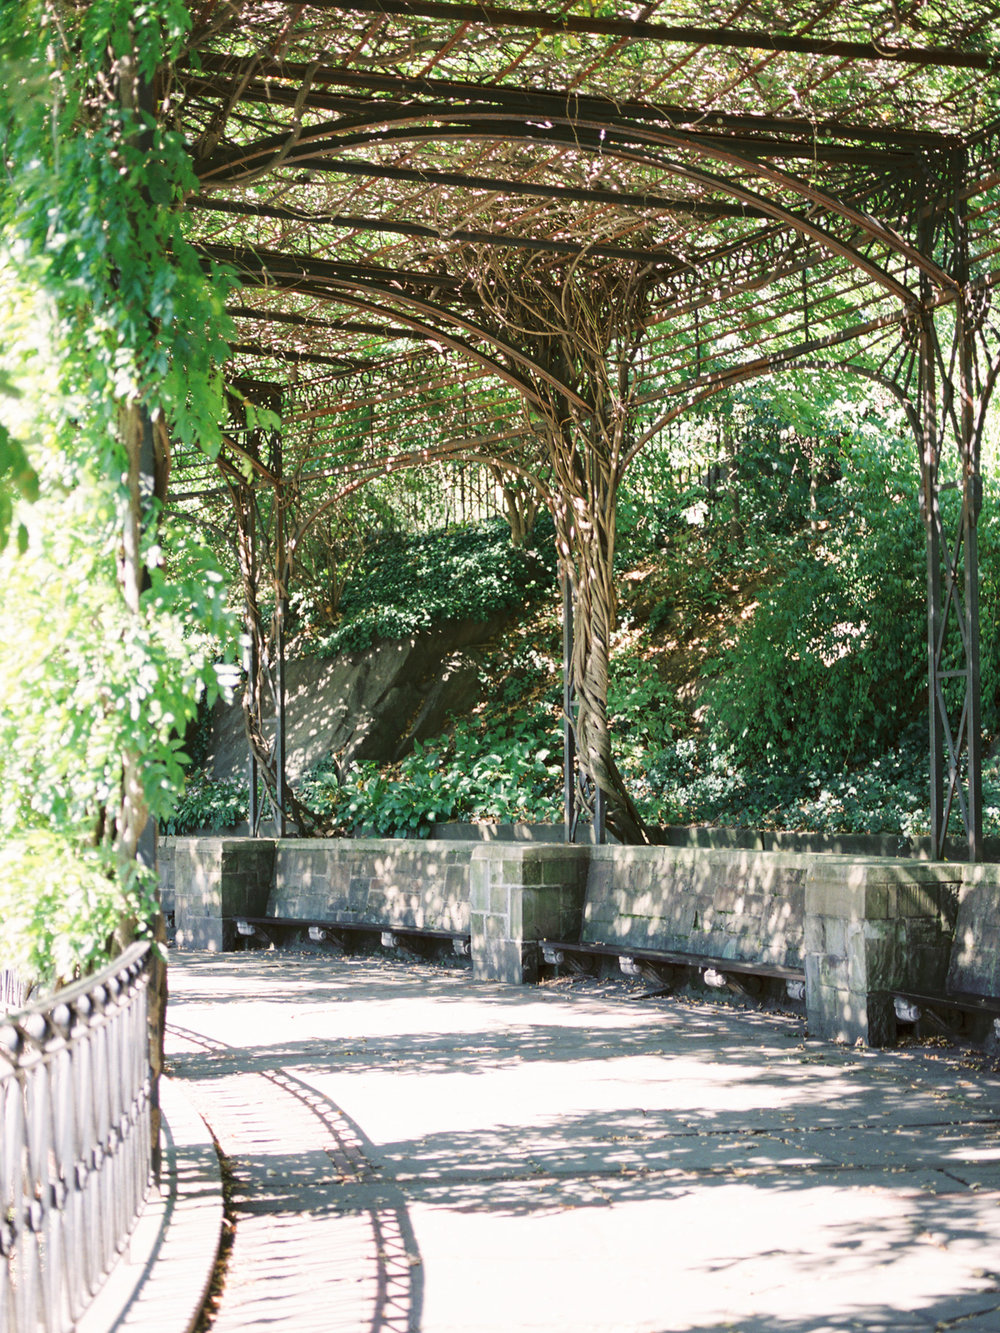  Gorgeous Archways at the Central Park Conservatory Gardens in NYC&nbsp; 